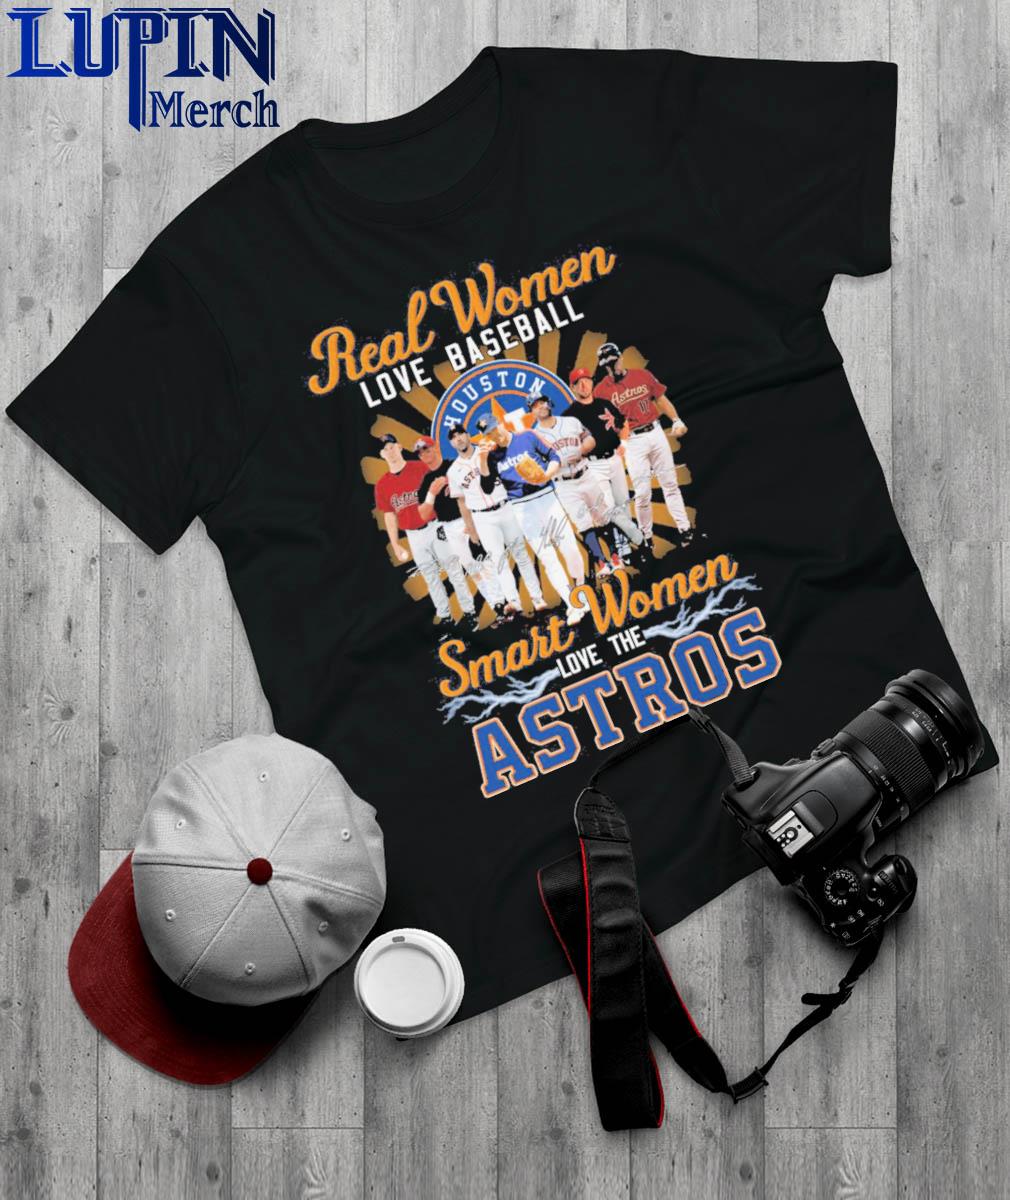 Real Women Love Baseball Smart Women Love The Houston Astros Signatures  Shirt, hoodie, sweater, long sleeve and tank top